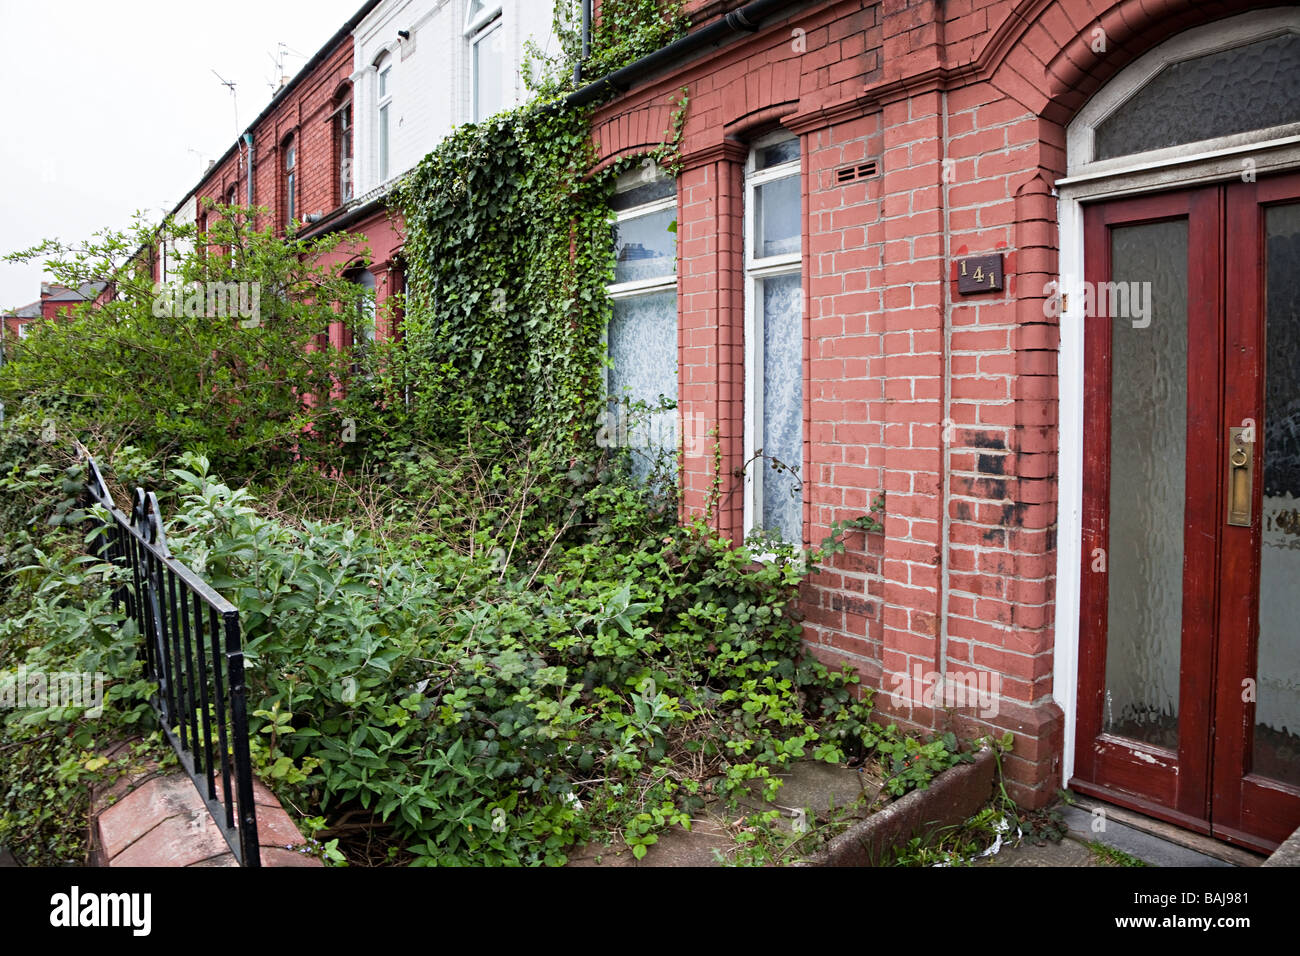 Overgrown front garden in row of terraced houses Cardiff Wales UK Stock Photo